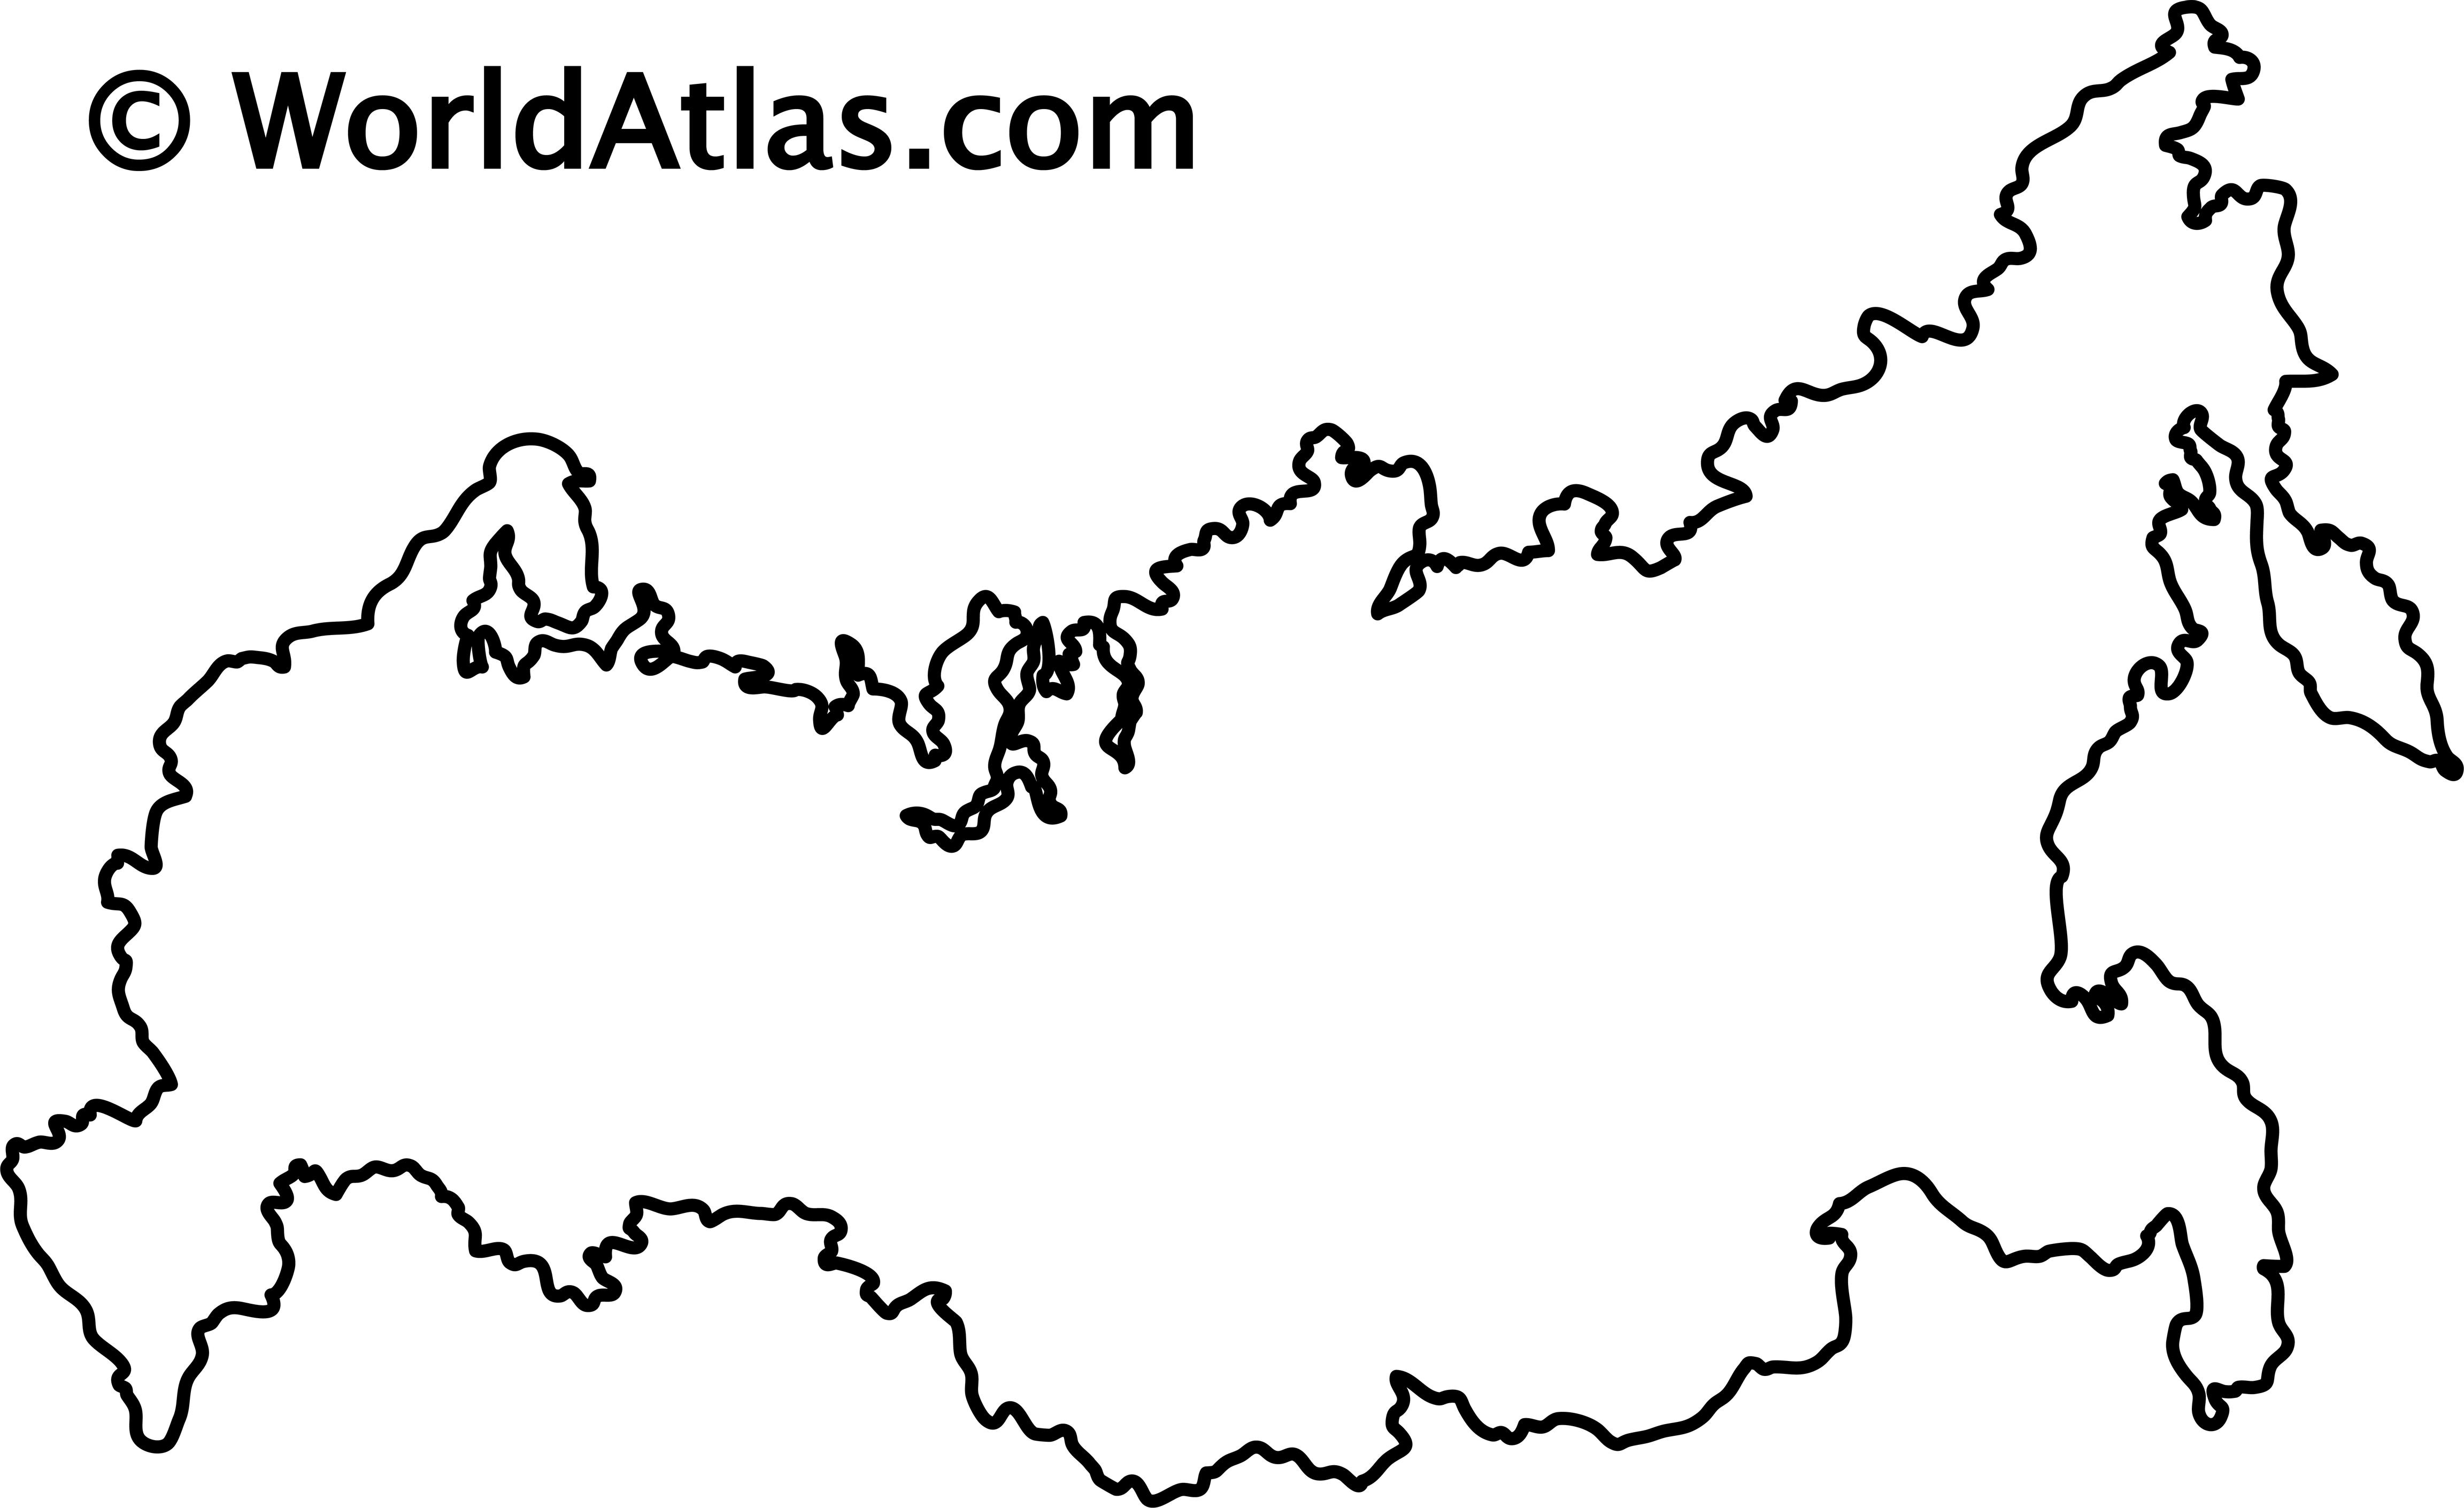 Russia Maps Facts World Atlas